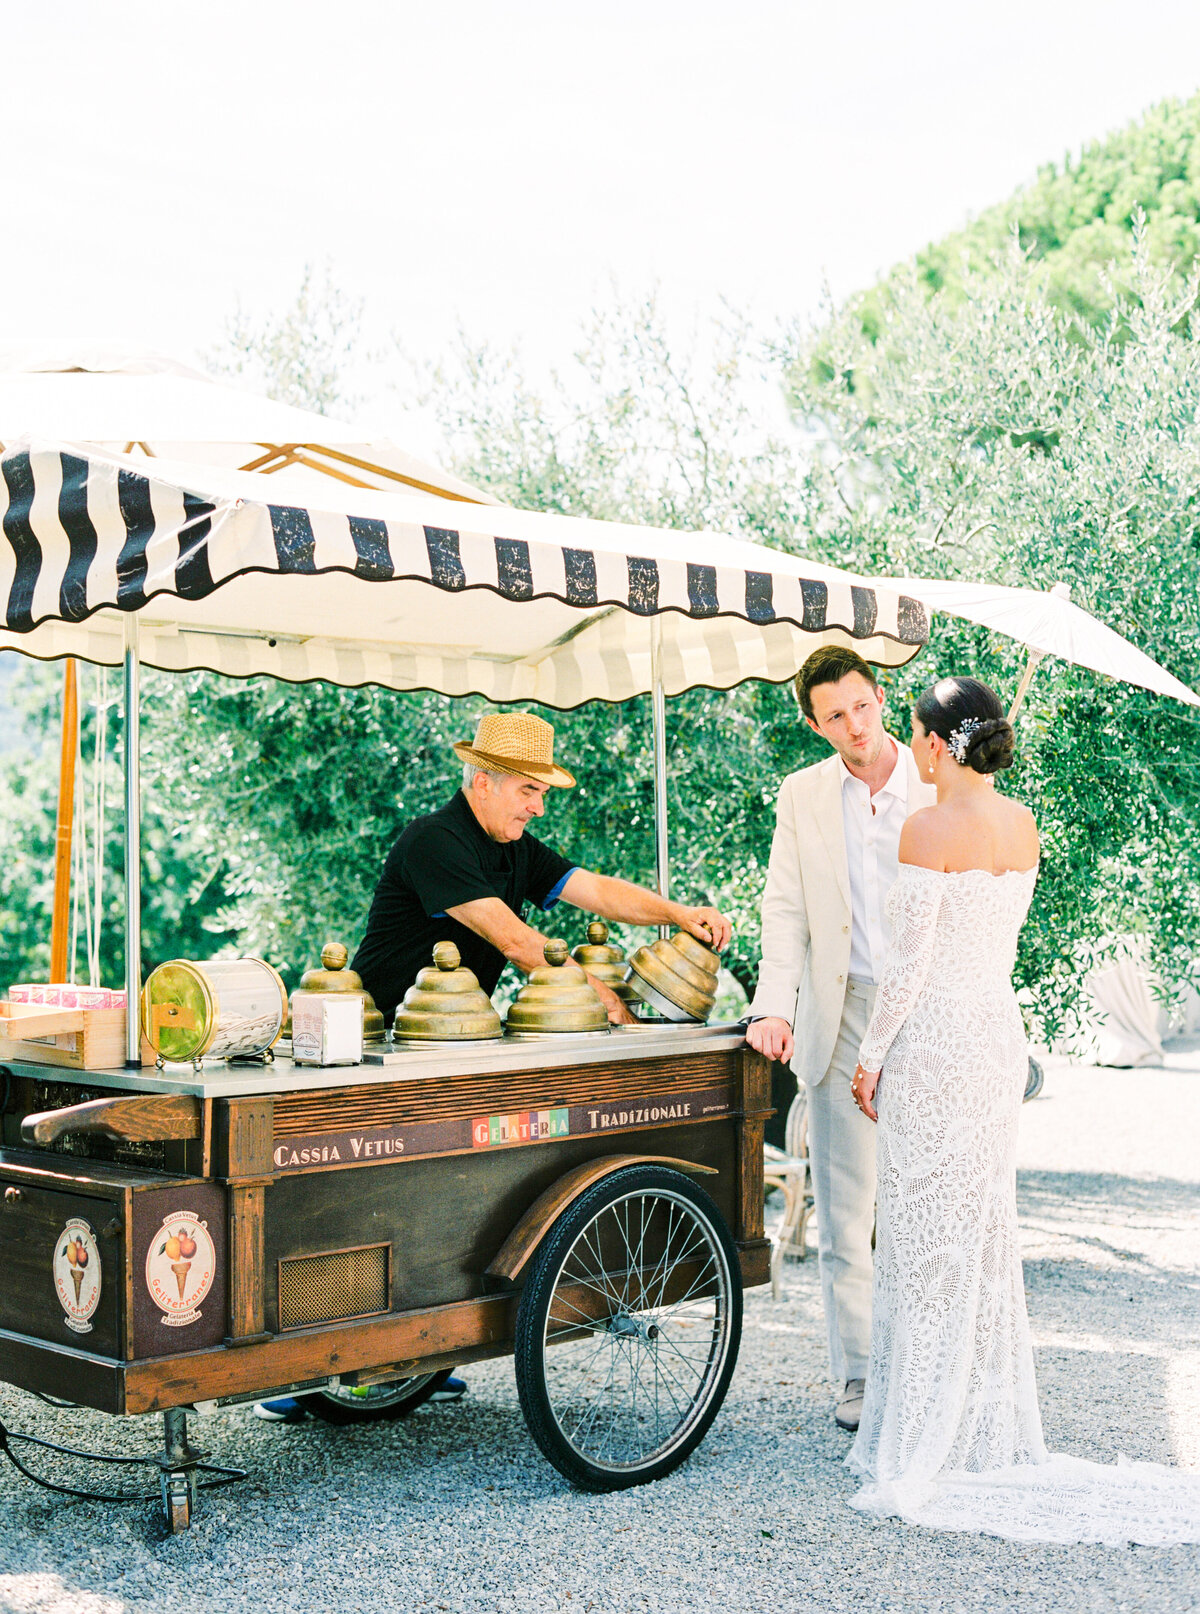 Film photograph of Bride in all lace wedding dress and parasol with groom in lite tan wedding suit ordering from a gelato truck at their wedding photographed by Italy wedding photographer at Villa Montanare Tuscany wedding